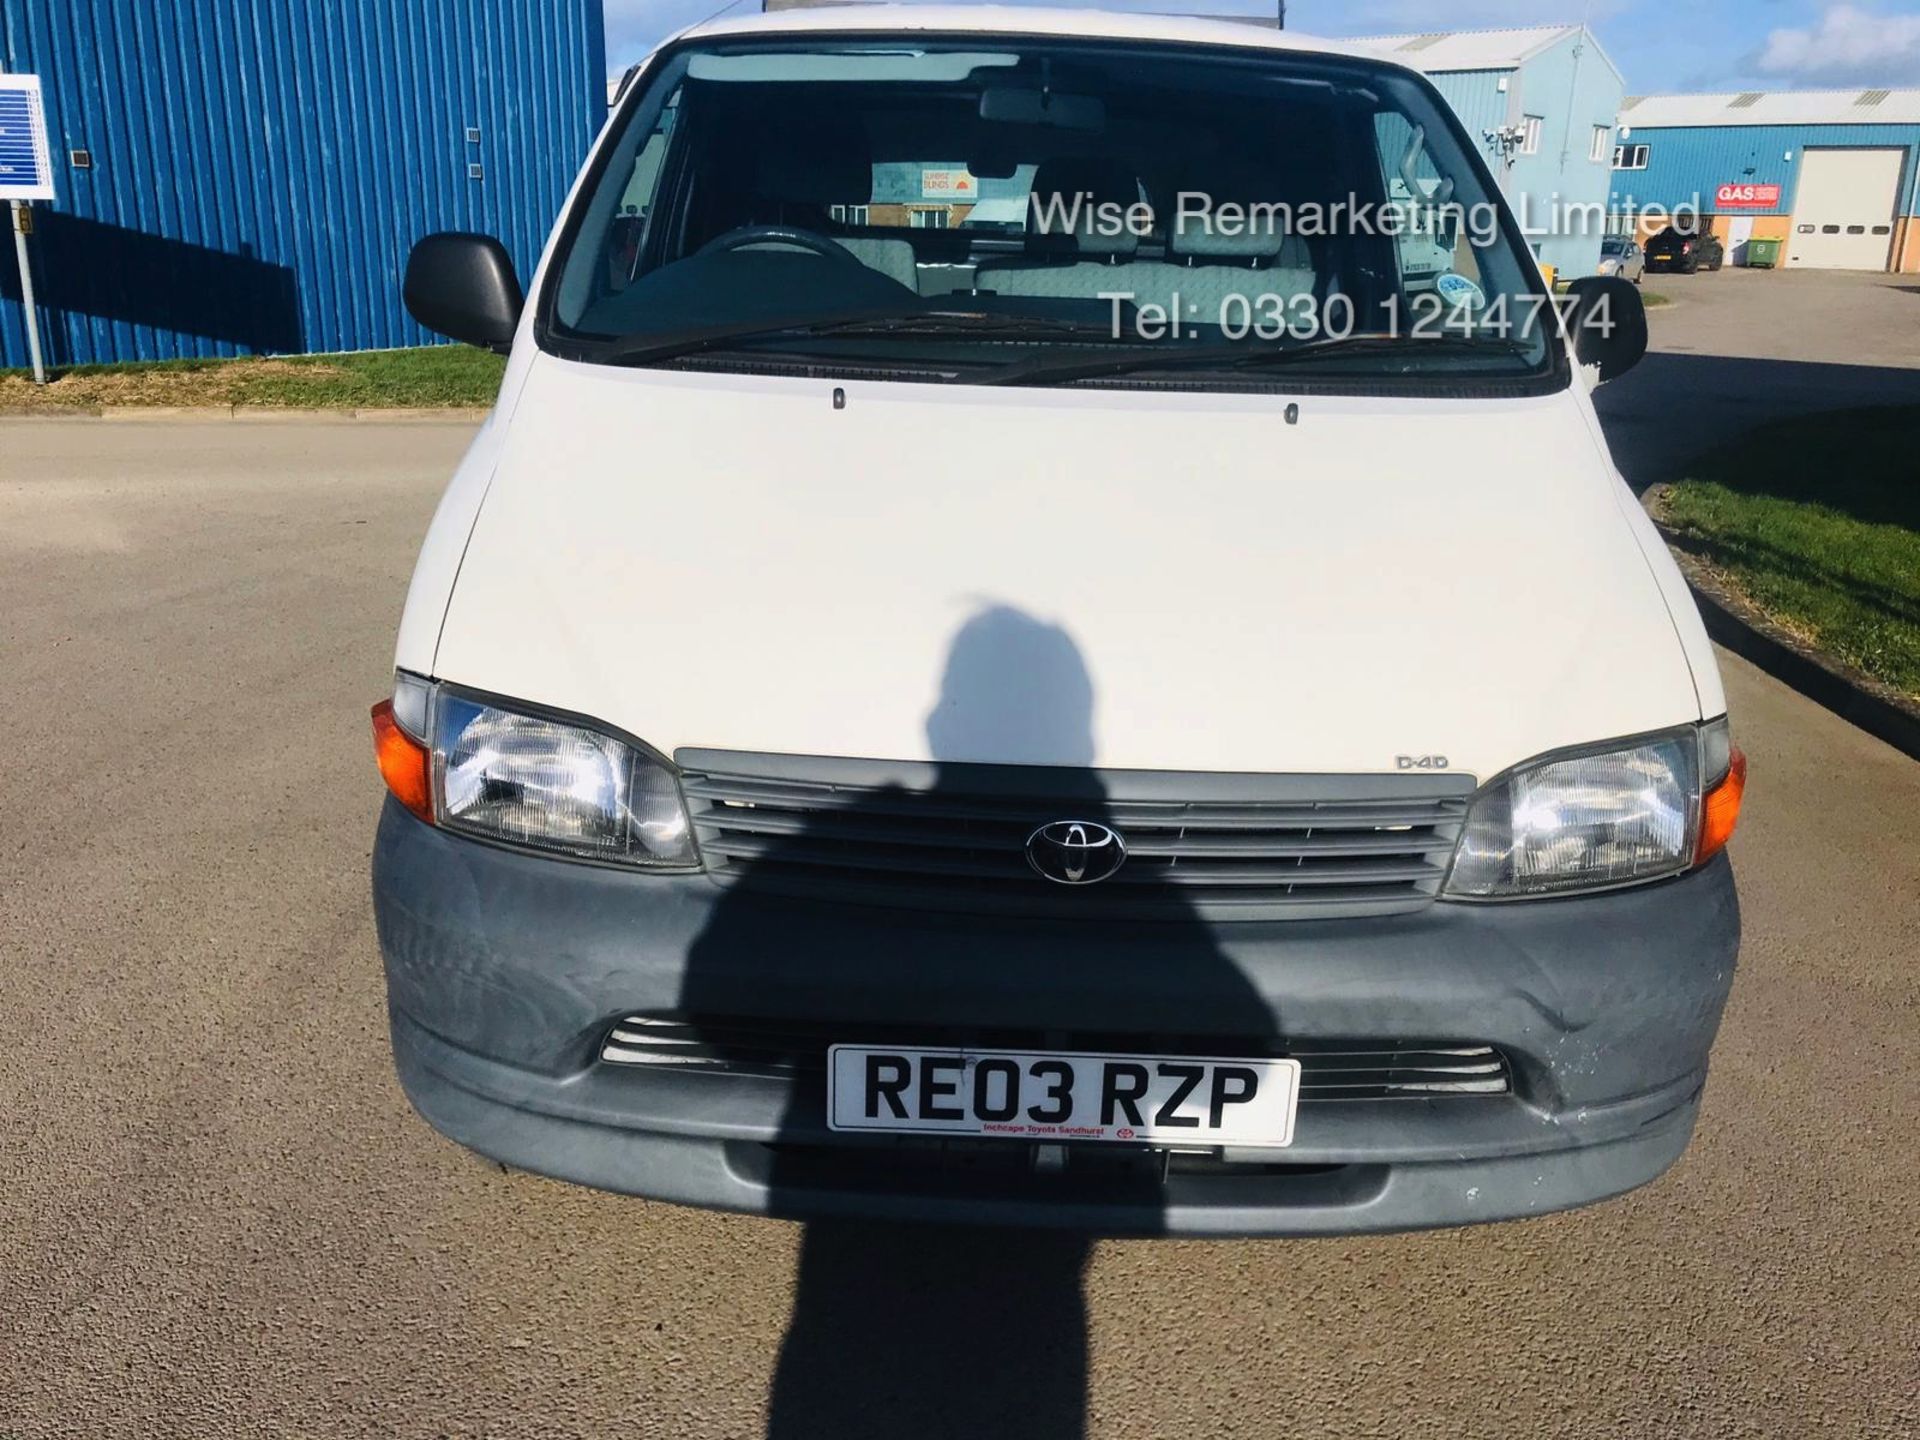 Toyota Hiace 300 GS 2.5 D4D - 2003 03 Reg - 1 Keeper From New - 3 Seater - Roof Rack - Image 4 of 15